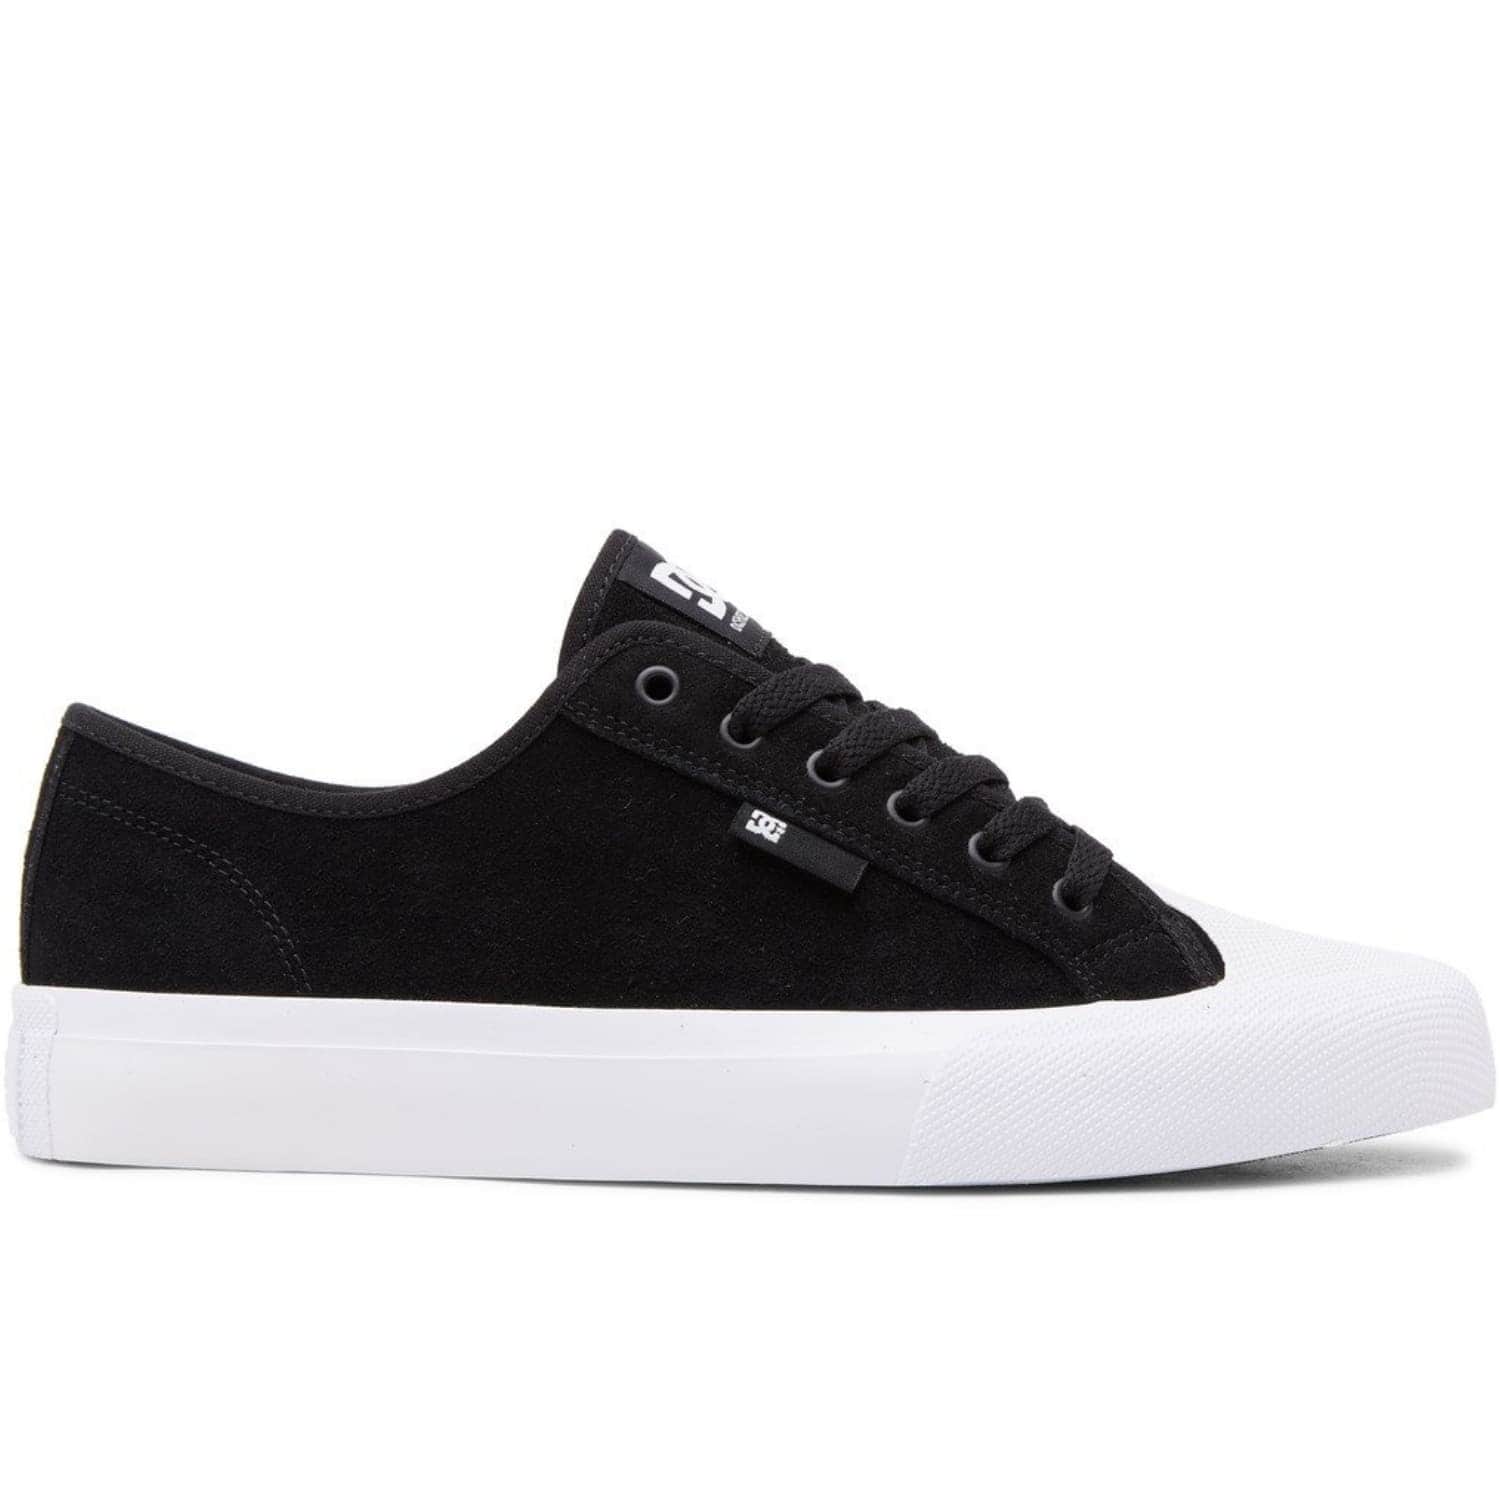 DC Manual RT S Skate Shoes - Black/White - Mens Skate Shoes by DC